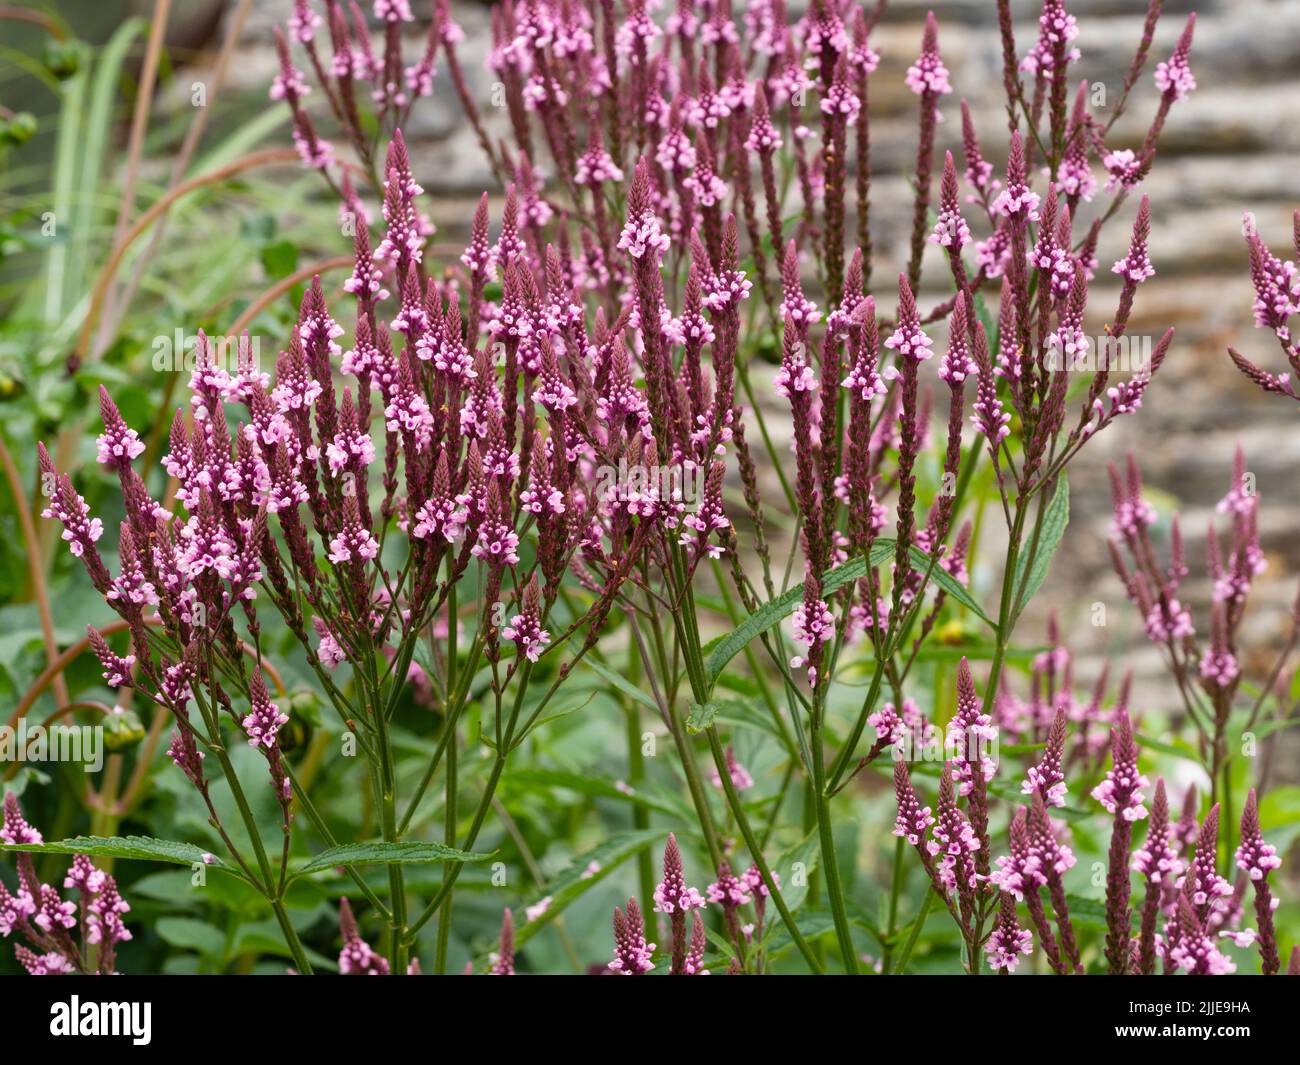 Branching flower heads with upright spikes and small pink summer flowers of the hardy perennial vervain, Verbena hastata f. rosea Stock Photo